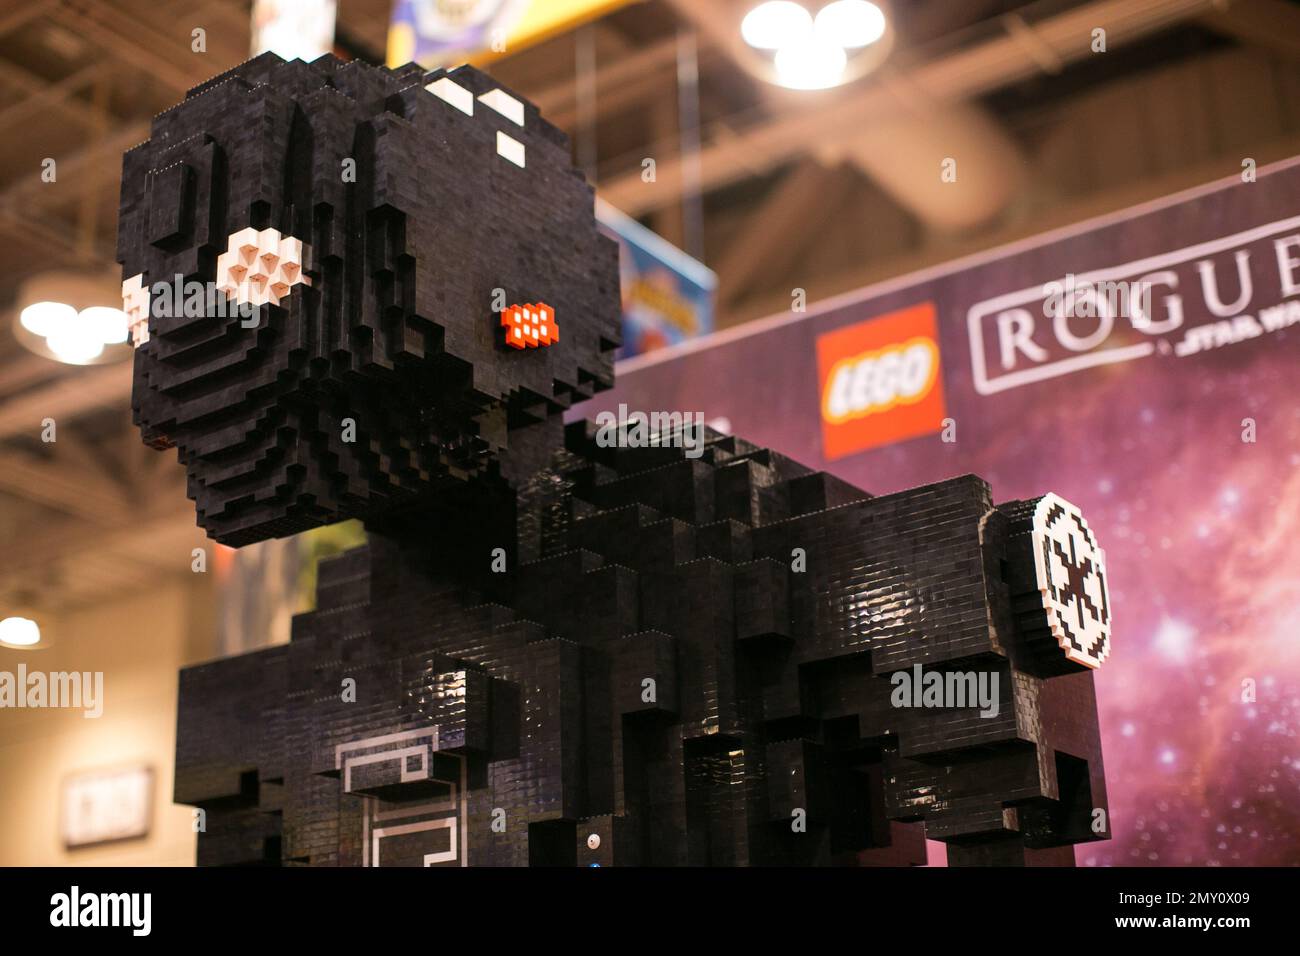 DISTRIBUTED FOR LEGO CANADA, - The Star Wars Rogue One K-2S0 droid made entirely of LEGO bricks at the LEGO Booth at Fan Expo on Sunday, 4, 2016, in